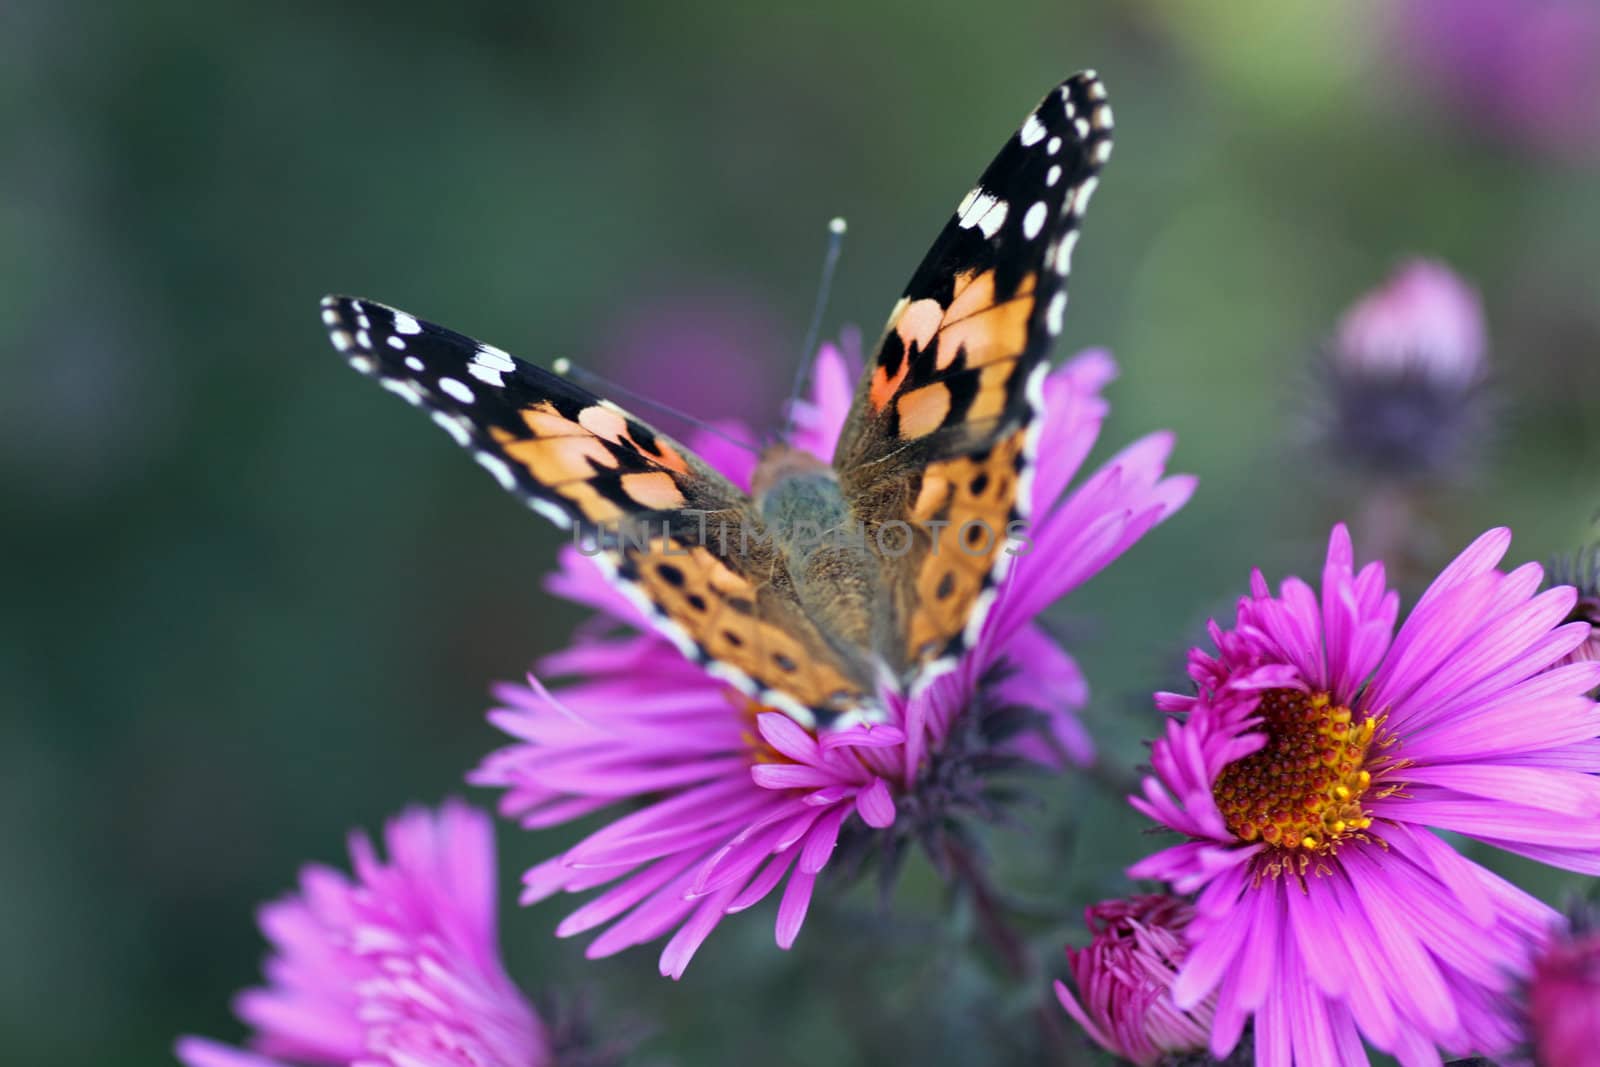 butterfly (Painted Lady) sitting on flower (chrysanthemum)